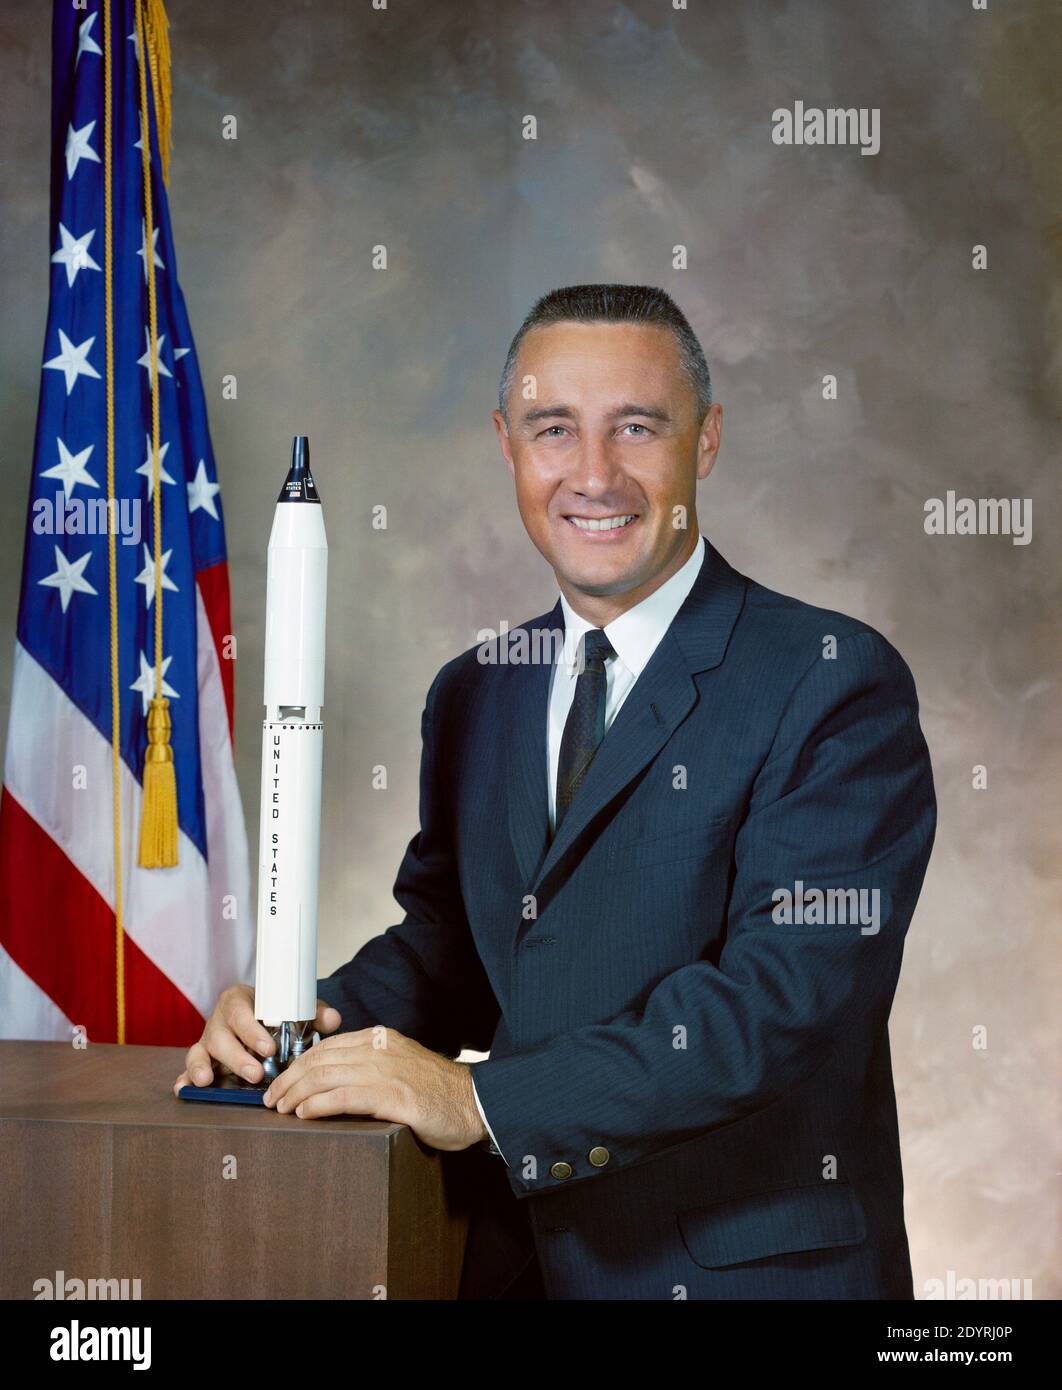 Virgil Ivan 'Gus' Grissom (1926 – January 27, 1967) United States Air Force (USAF) pilot and a member of the Mercury Seven selected by National Aeronautics and Space Administration's (NASA) as Project Mercury astronauts to be the first Americans in outer space. He was a Project Gemini and an Apollo program astronaut. As a member of the NASA Astronaut Corps, Grissom was the second American to fly in space. He was also the second American to fly in space twice, beaten only by Joe Walker with his sub-orbital X-15 flights. Stock Photo